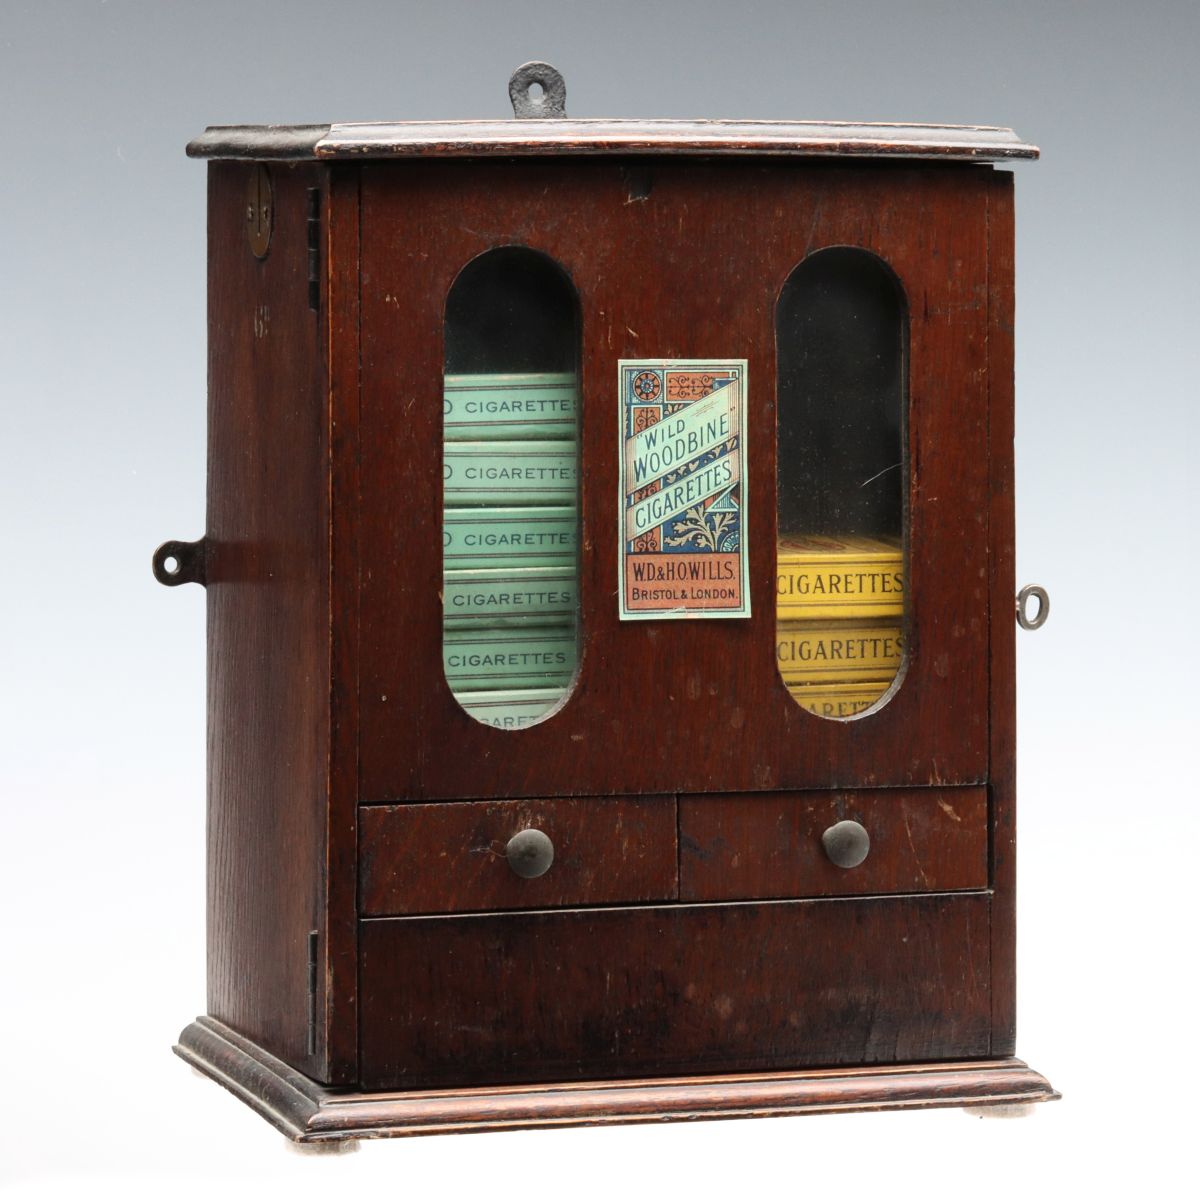 EARLY 20TH C. ENGLISH CIGARETTE BOXES AND VENDOR